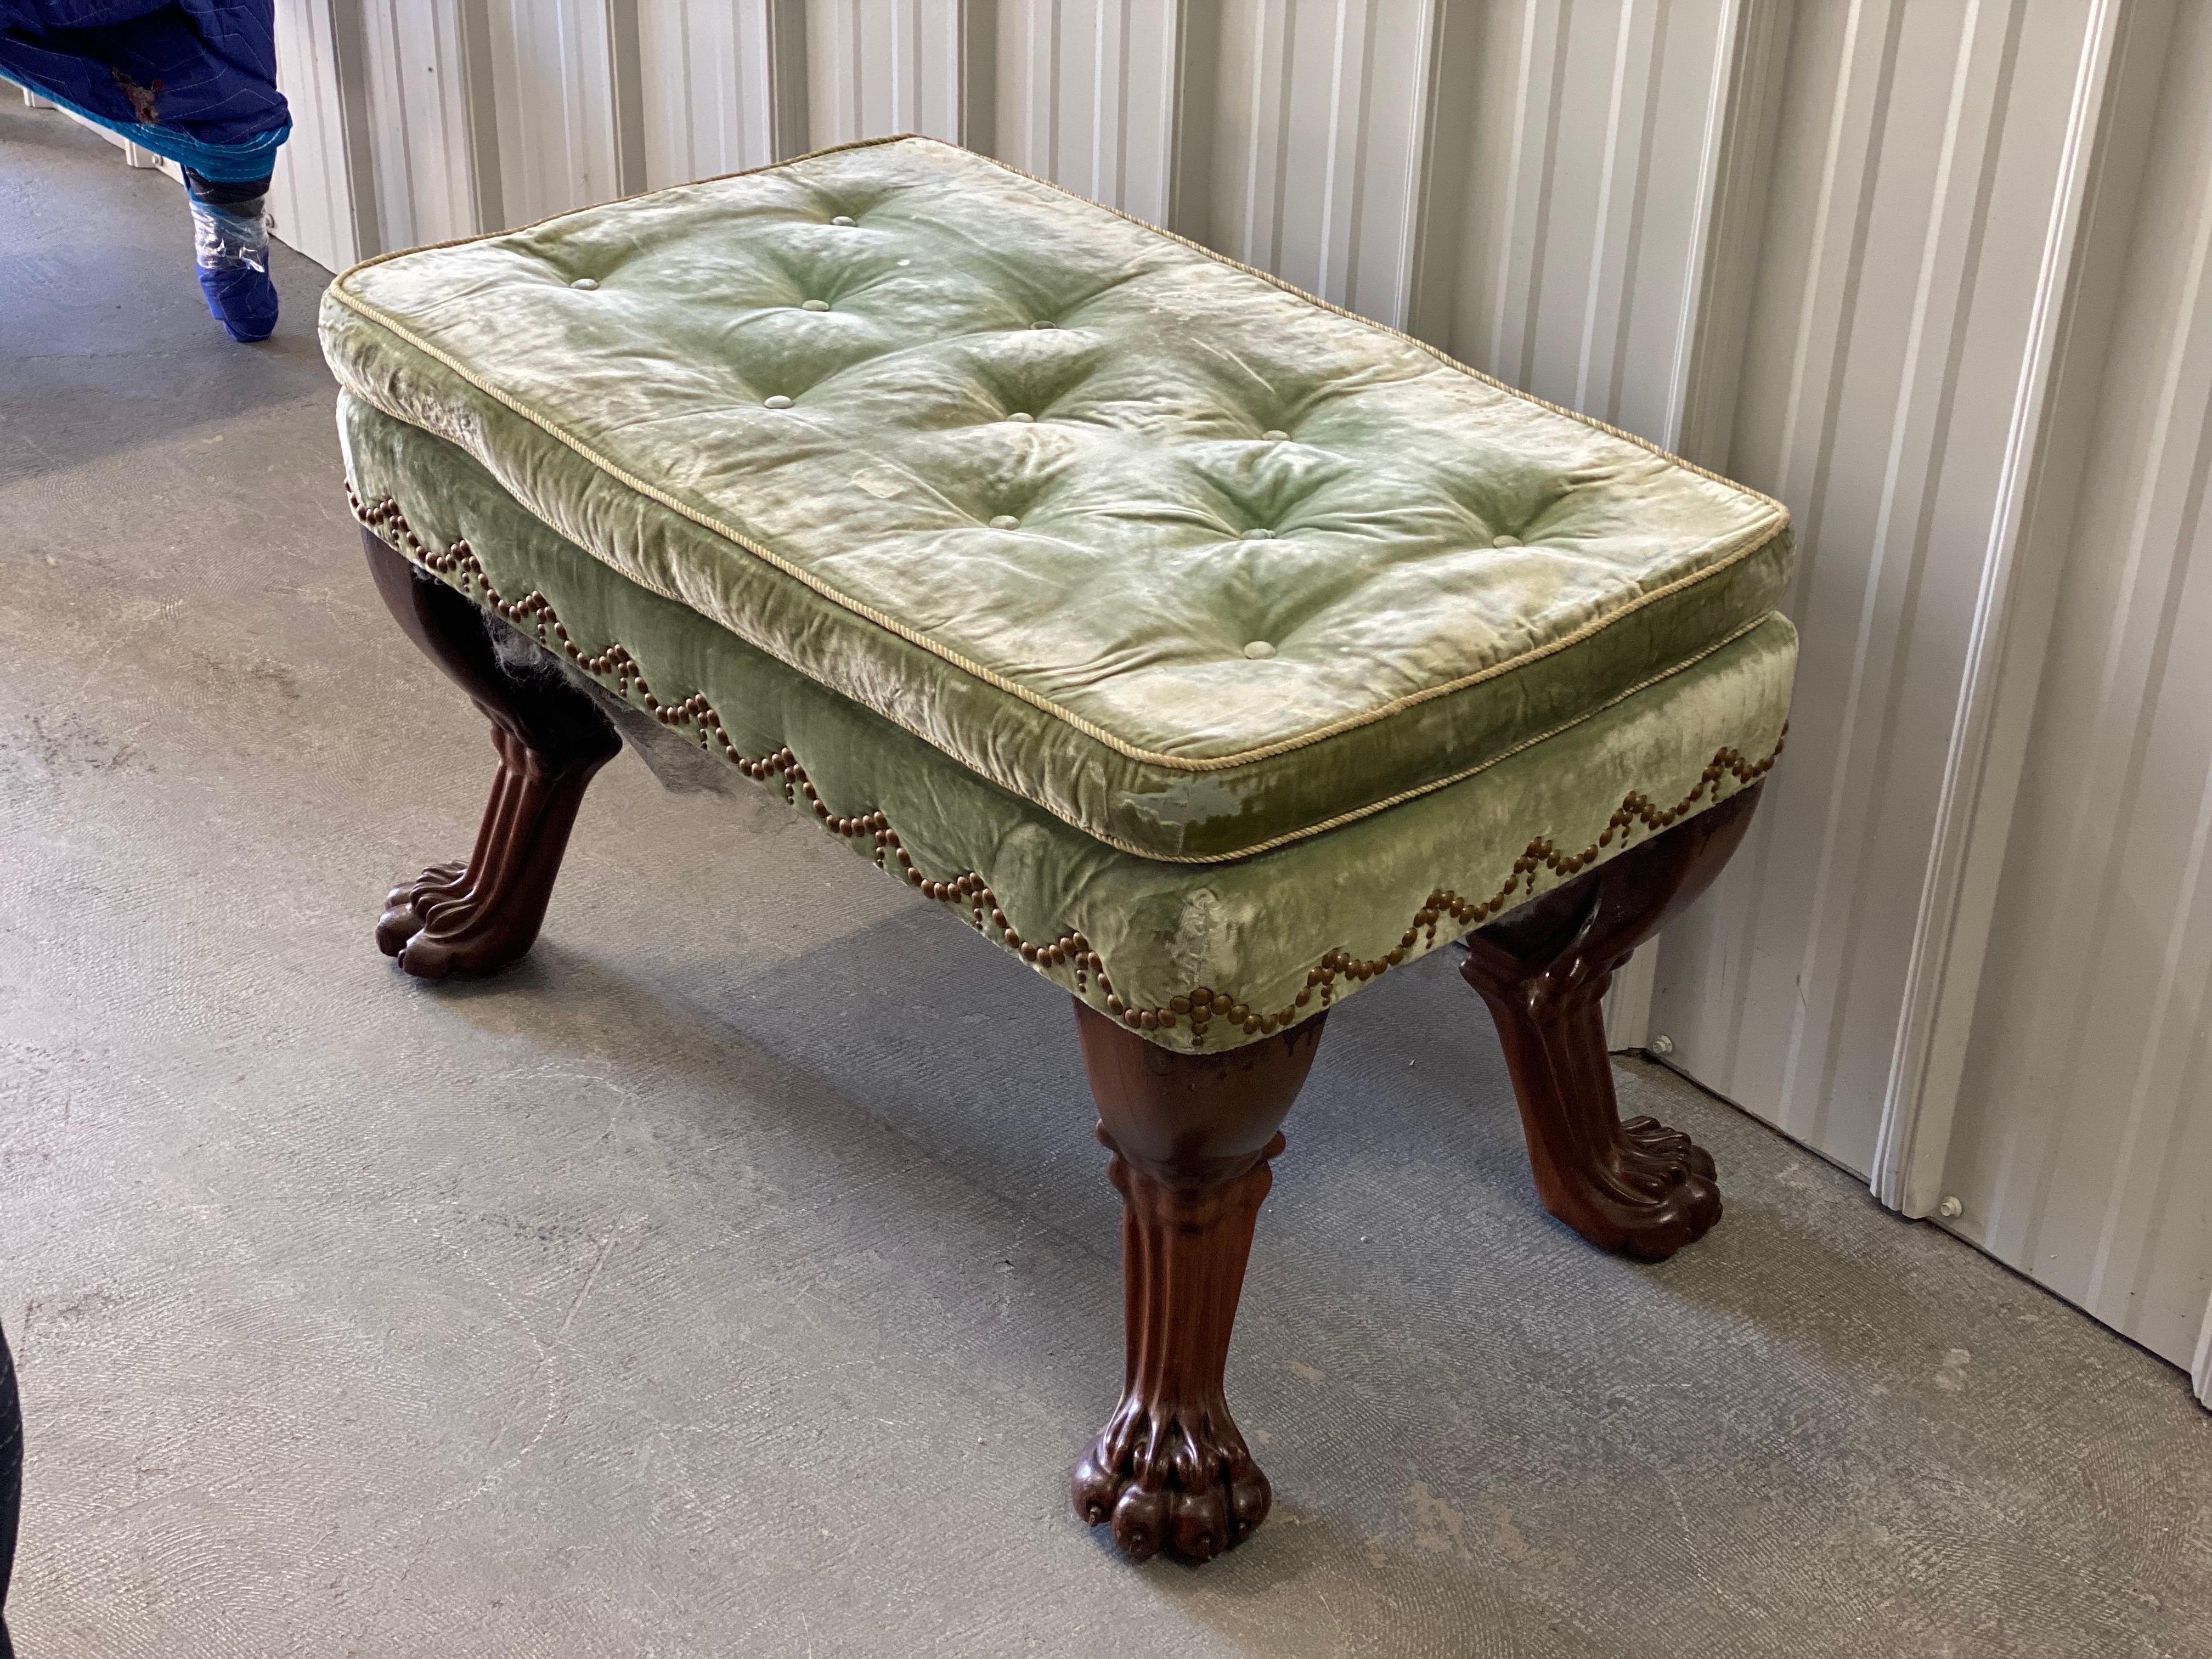 18th Century English Mahogany Clawfoot Stool in Velvet with Nailheads In Good Condition For Sale In Southampton, NY